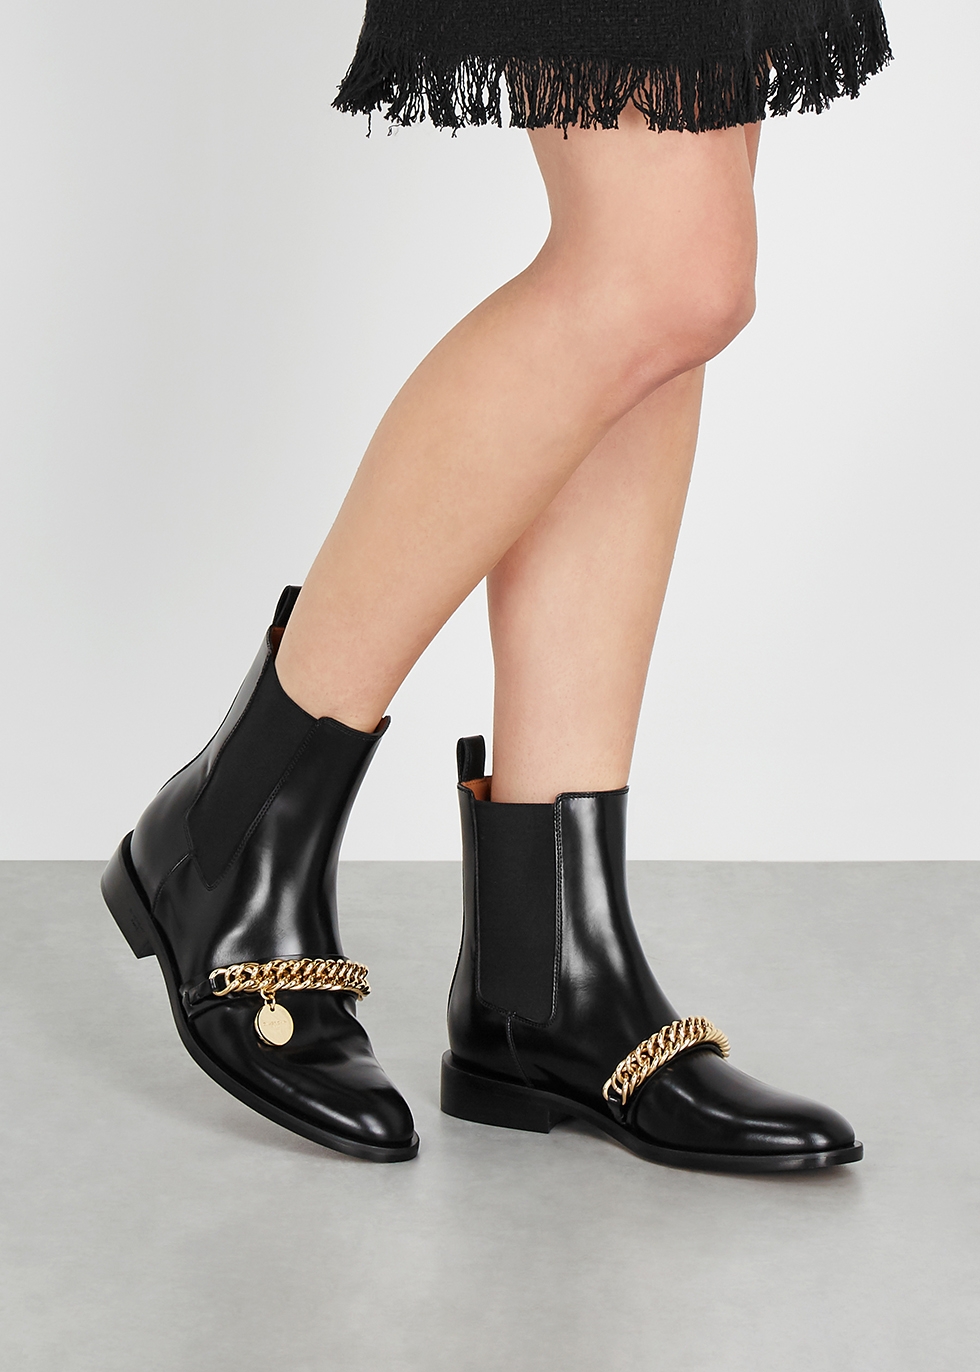 givenchy boots with chain